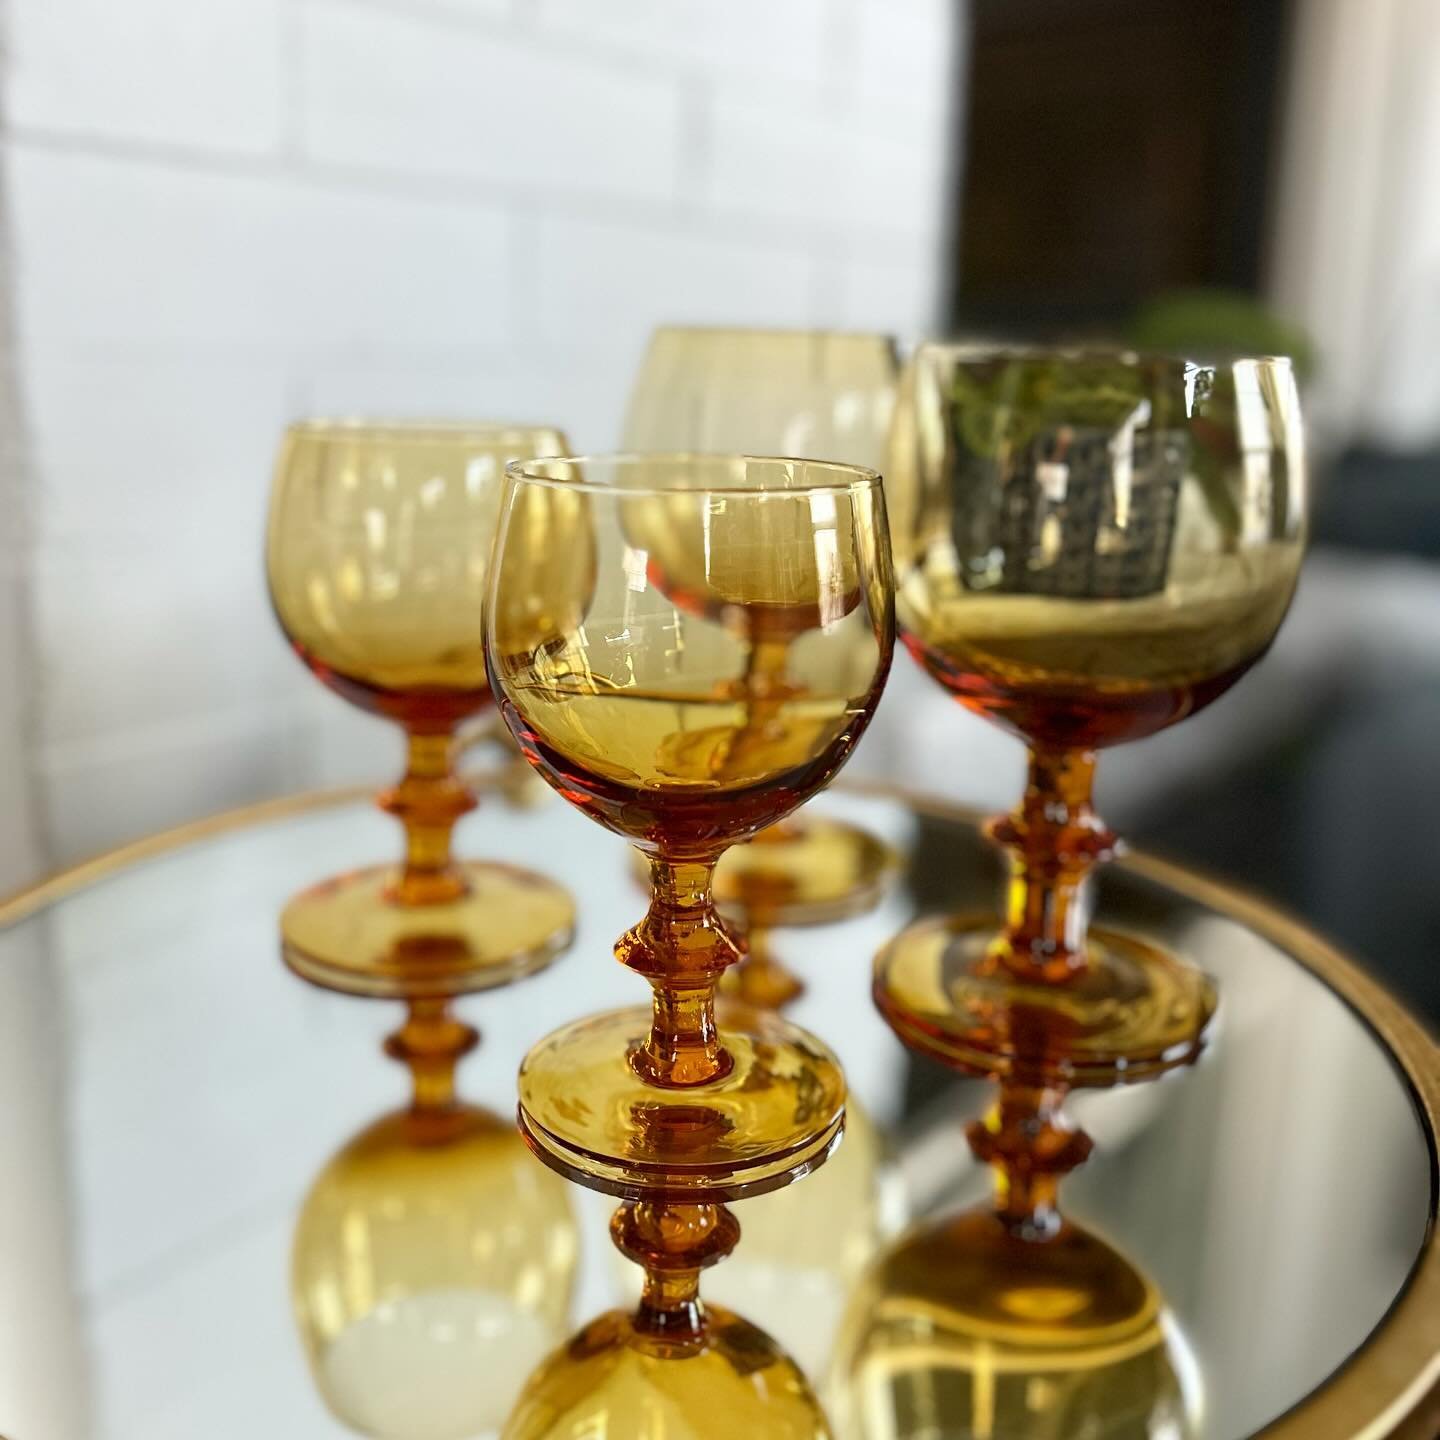 Gorgeous MCM Amber Anchor Hocking Fire King Glassware. Small and Large Wine Goblet sets available! DM for more information.

#anchorhocking #vintageglassware #vintagebarwareforsale #amberglass #mcmglassware #denvervintage #vintageentertaining